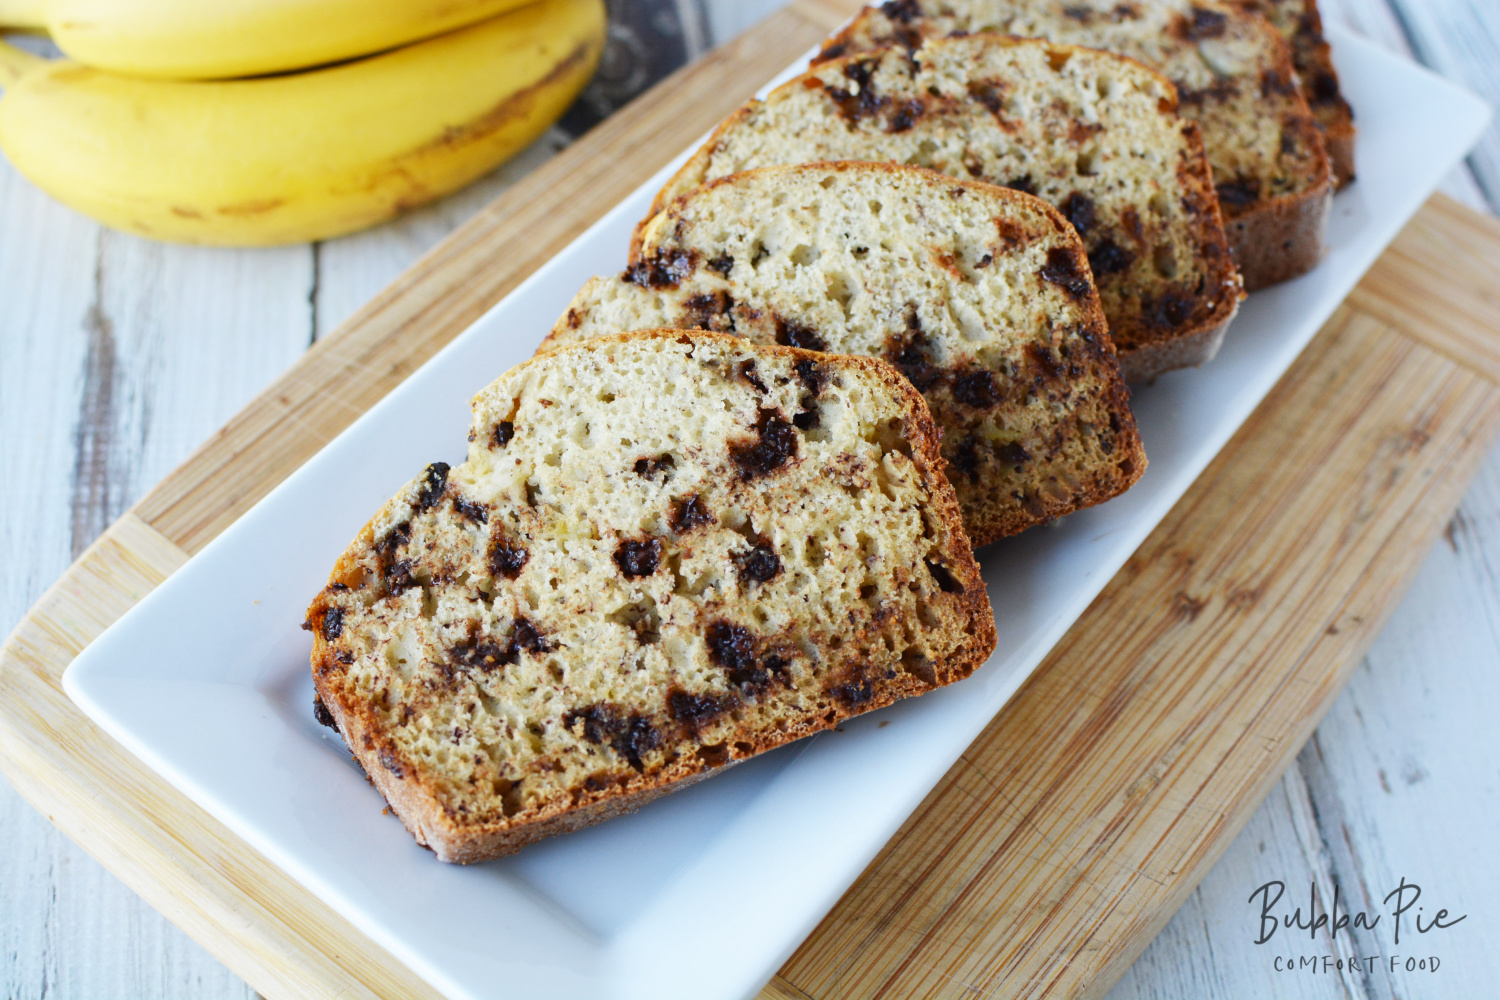 chocolate chip banana bread is moist and delicious